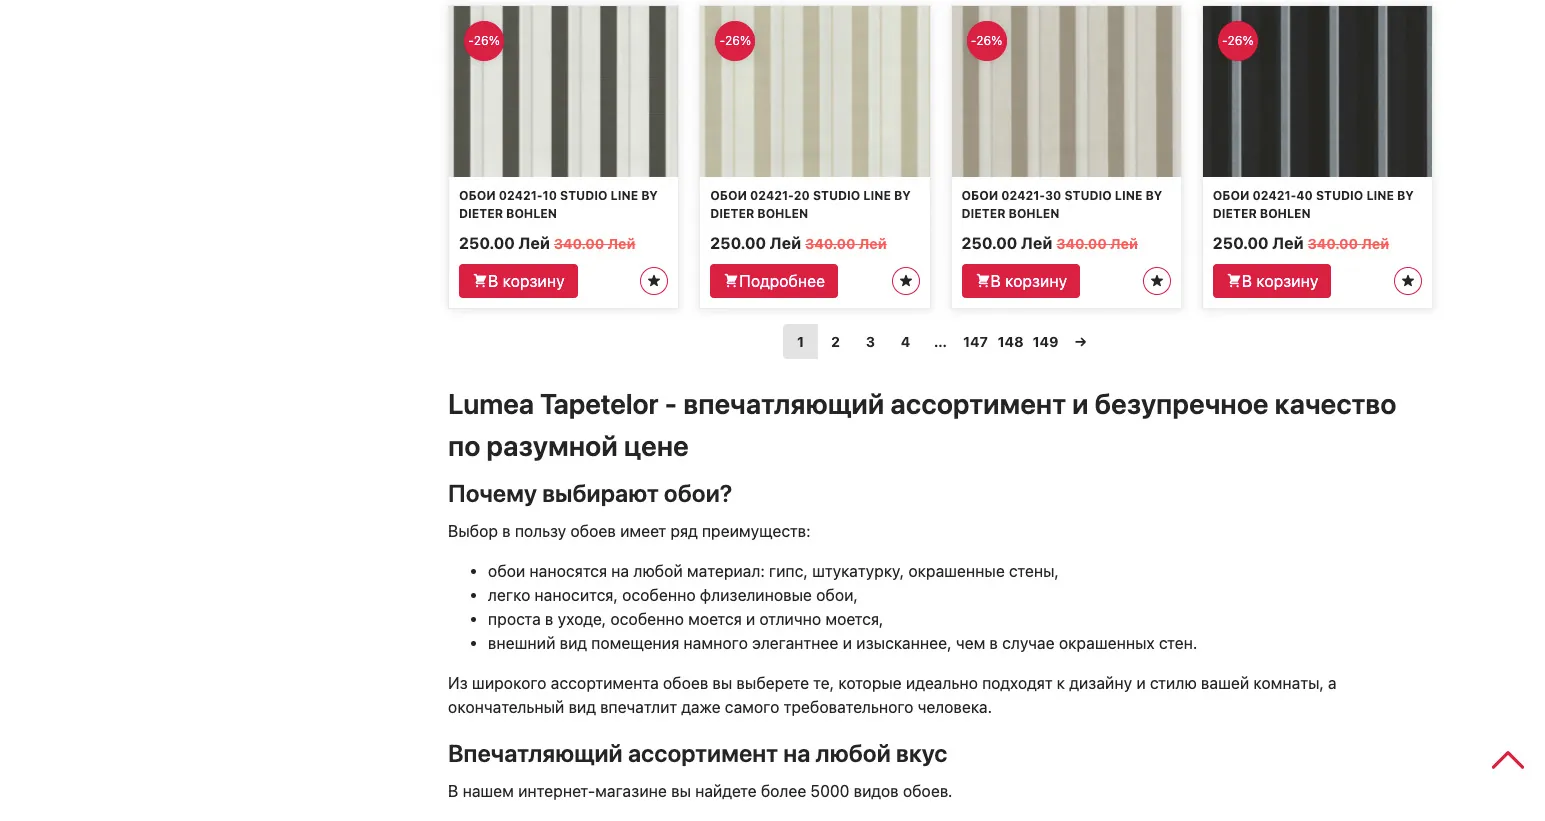 Redesign of the online store Lumea Tapetelor 15